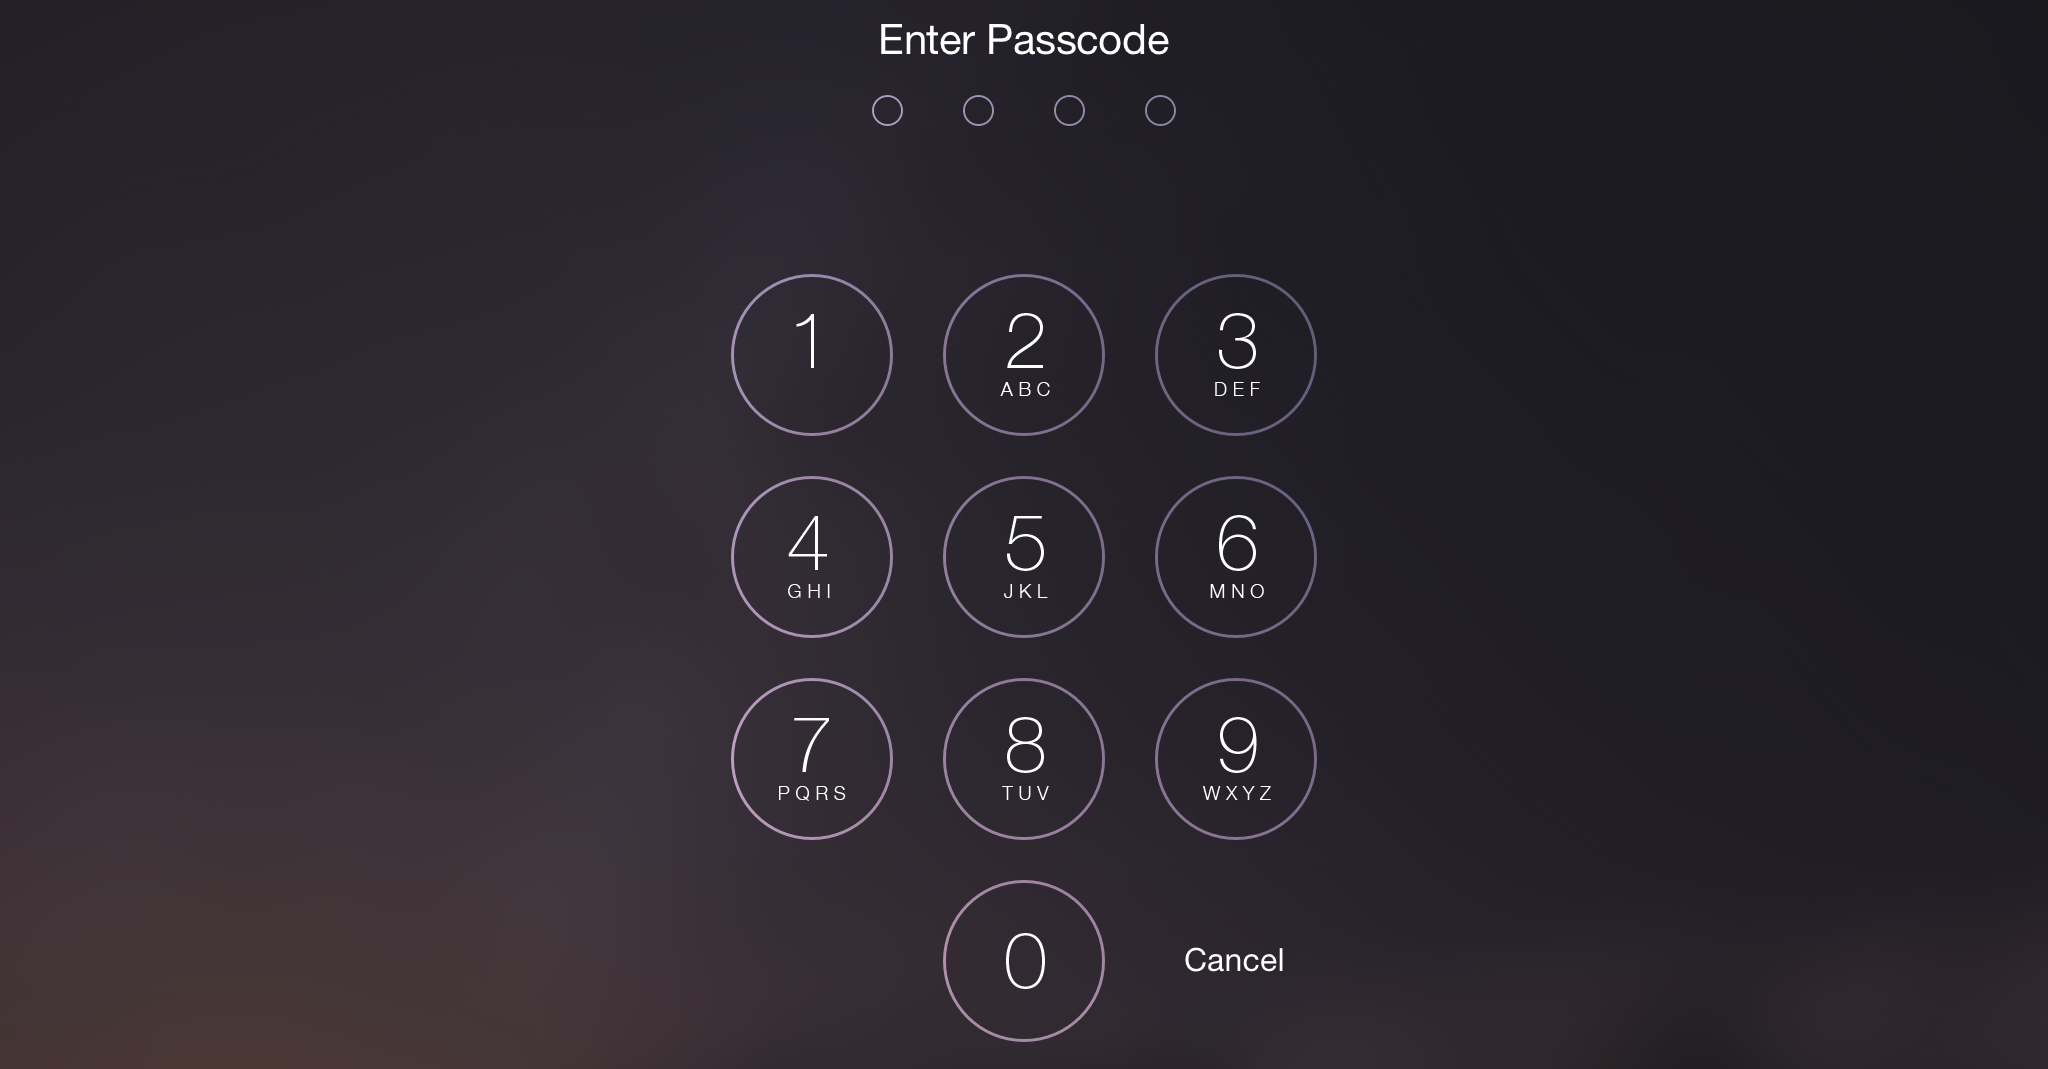 Siri App Store Hack - Unlocking an iPad Passcode without a Computer